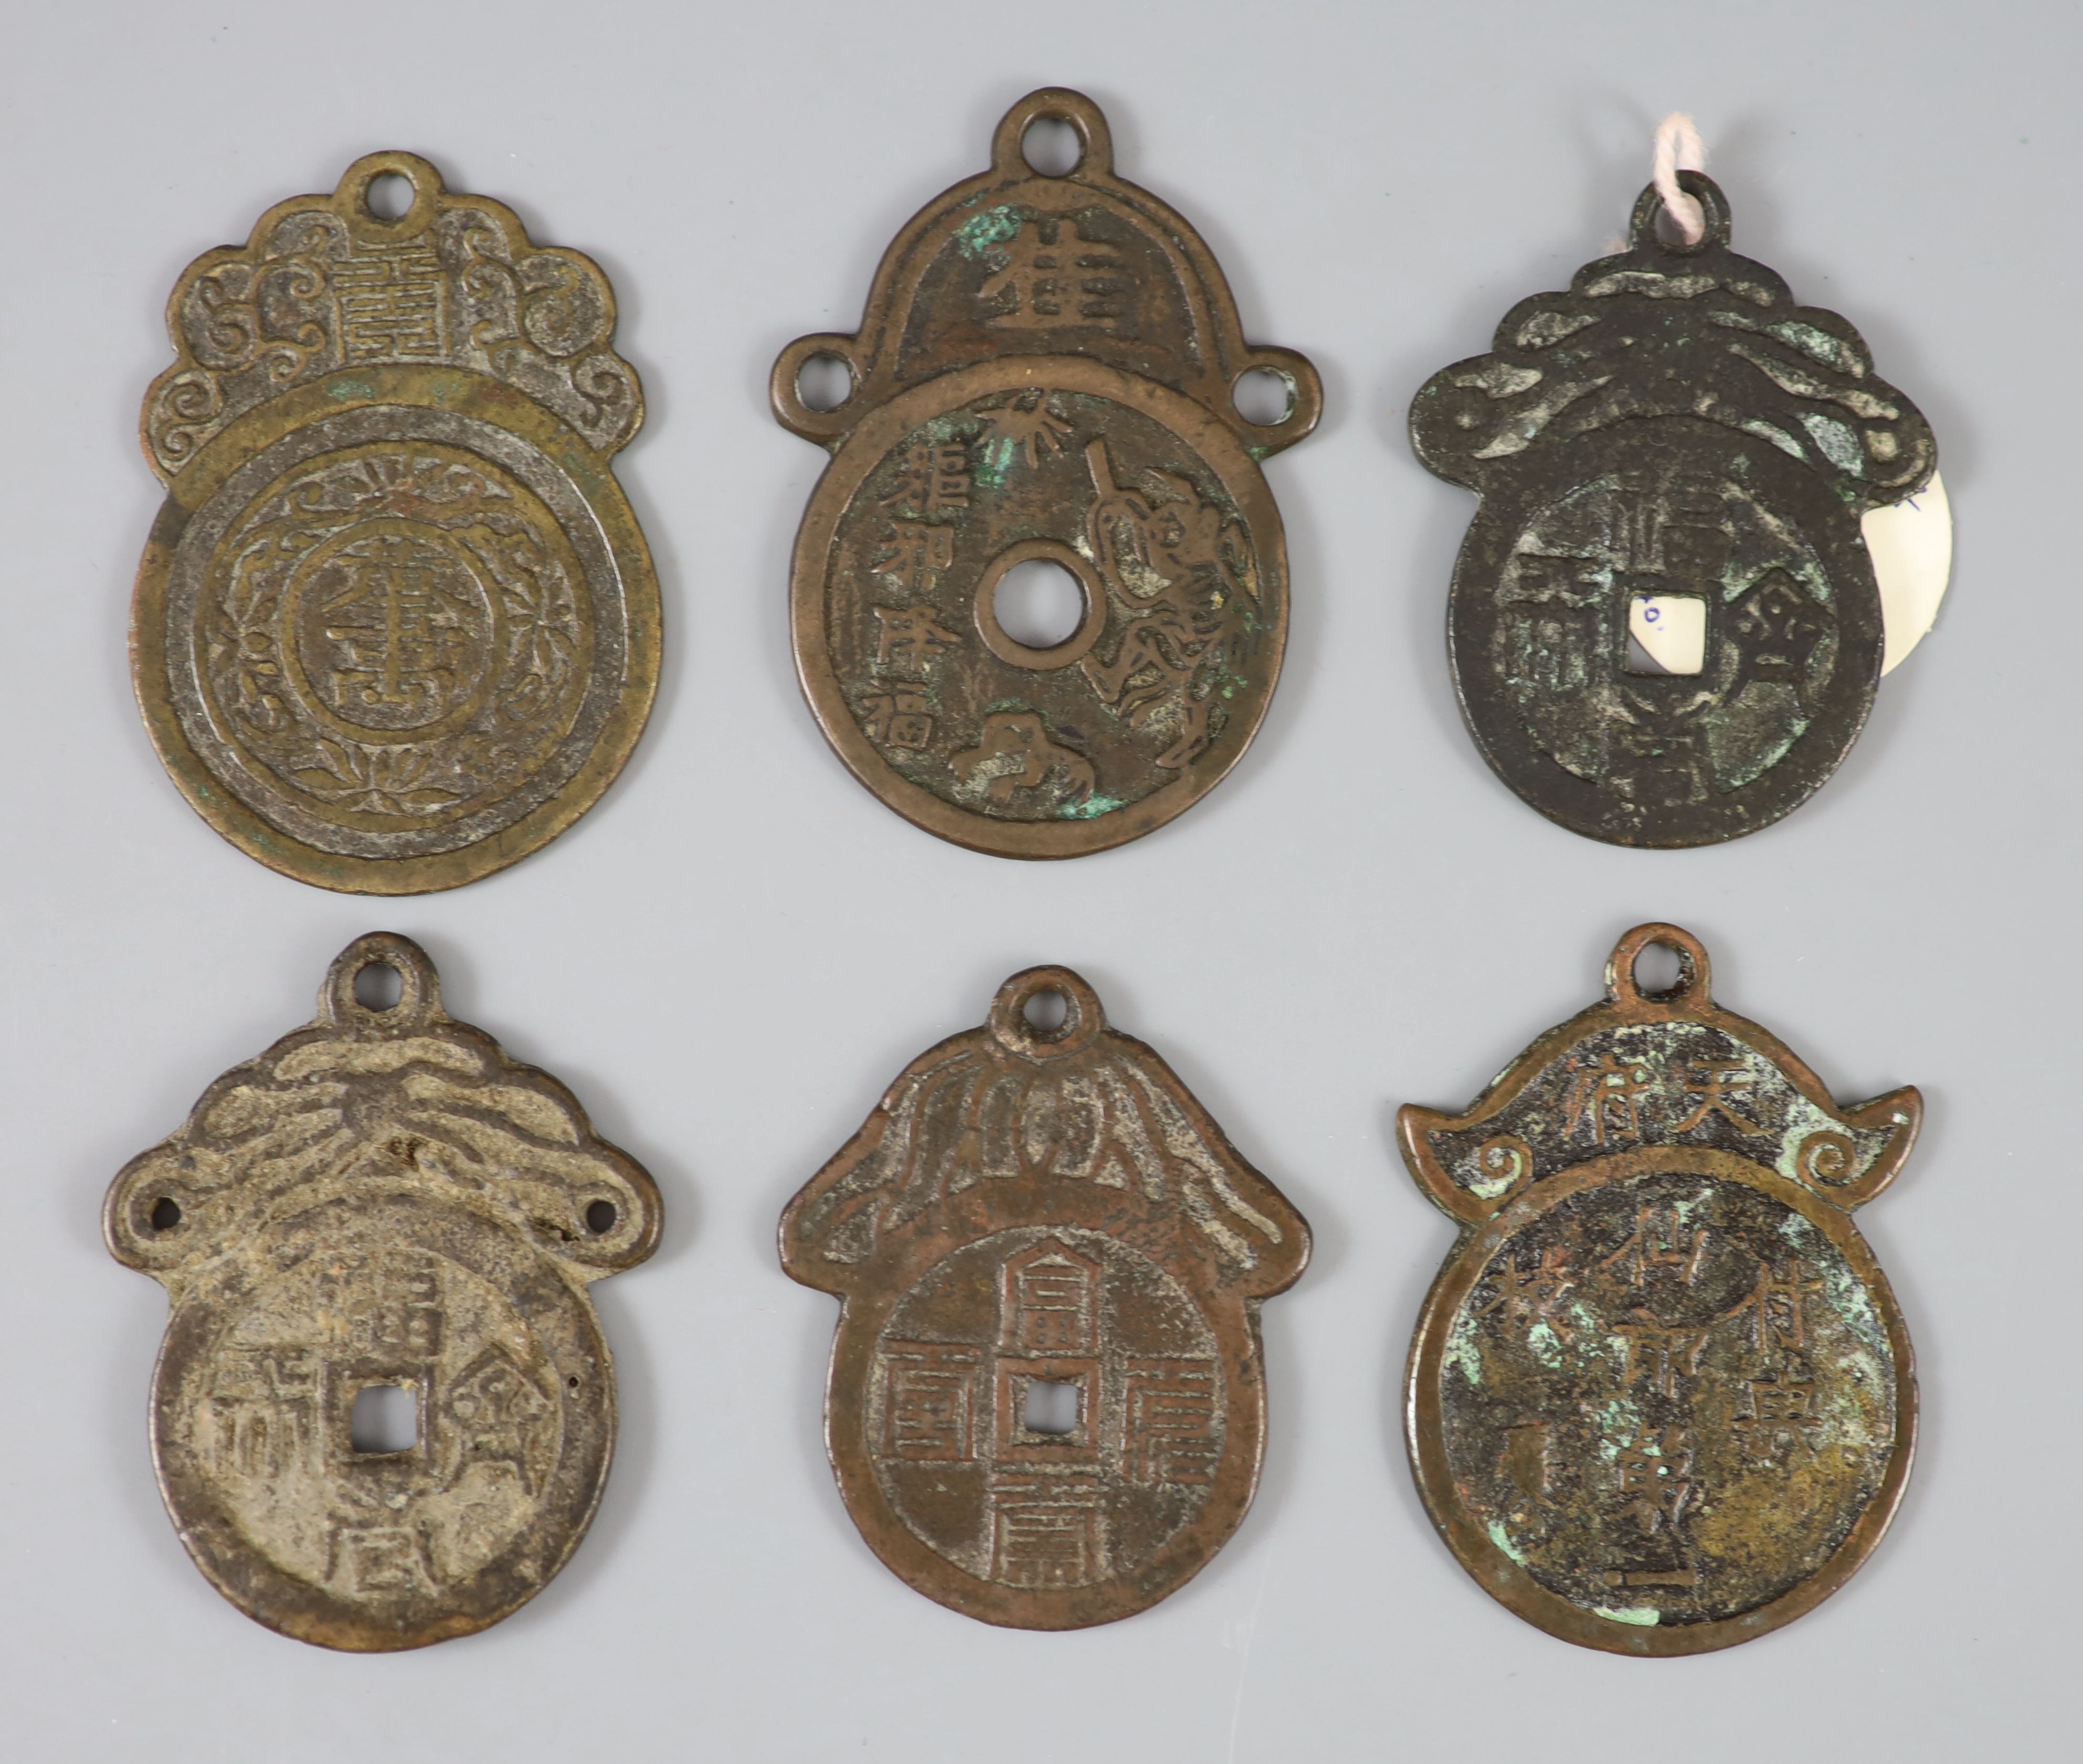 China, 6 large bronze pendant charms or amulets, Qing dynasty,